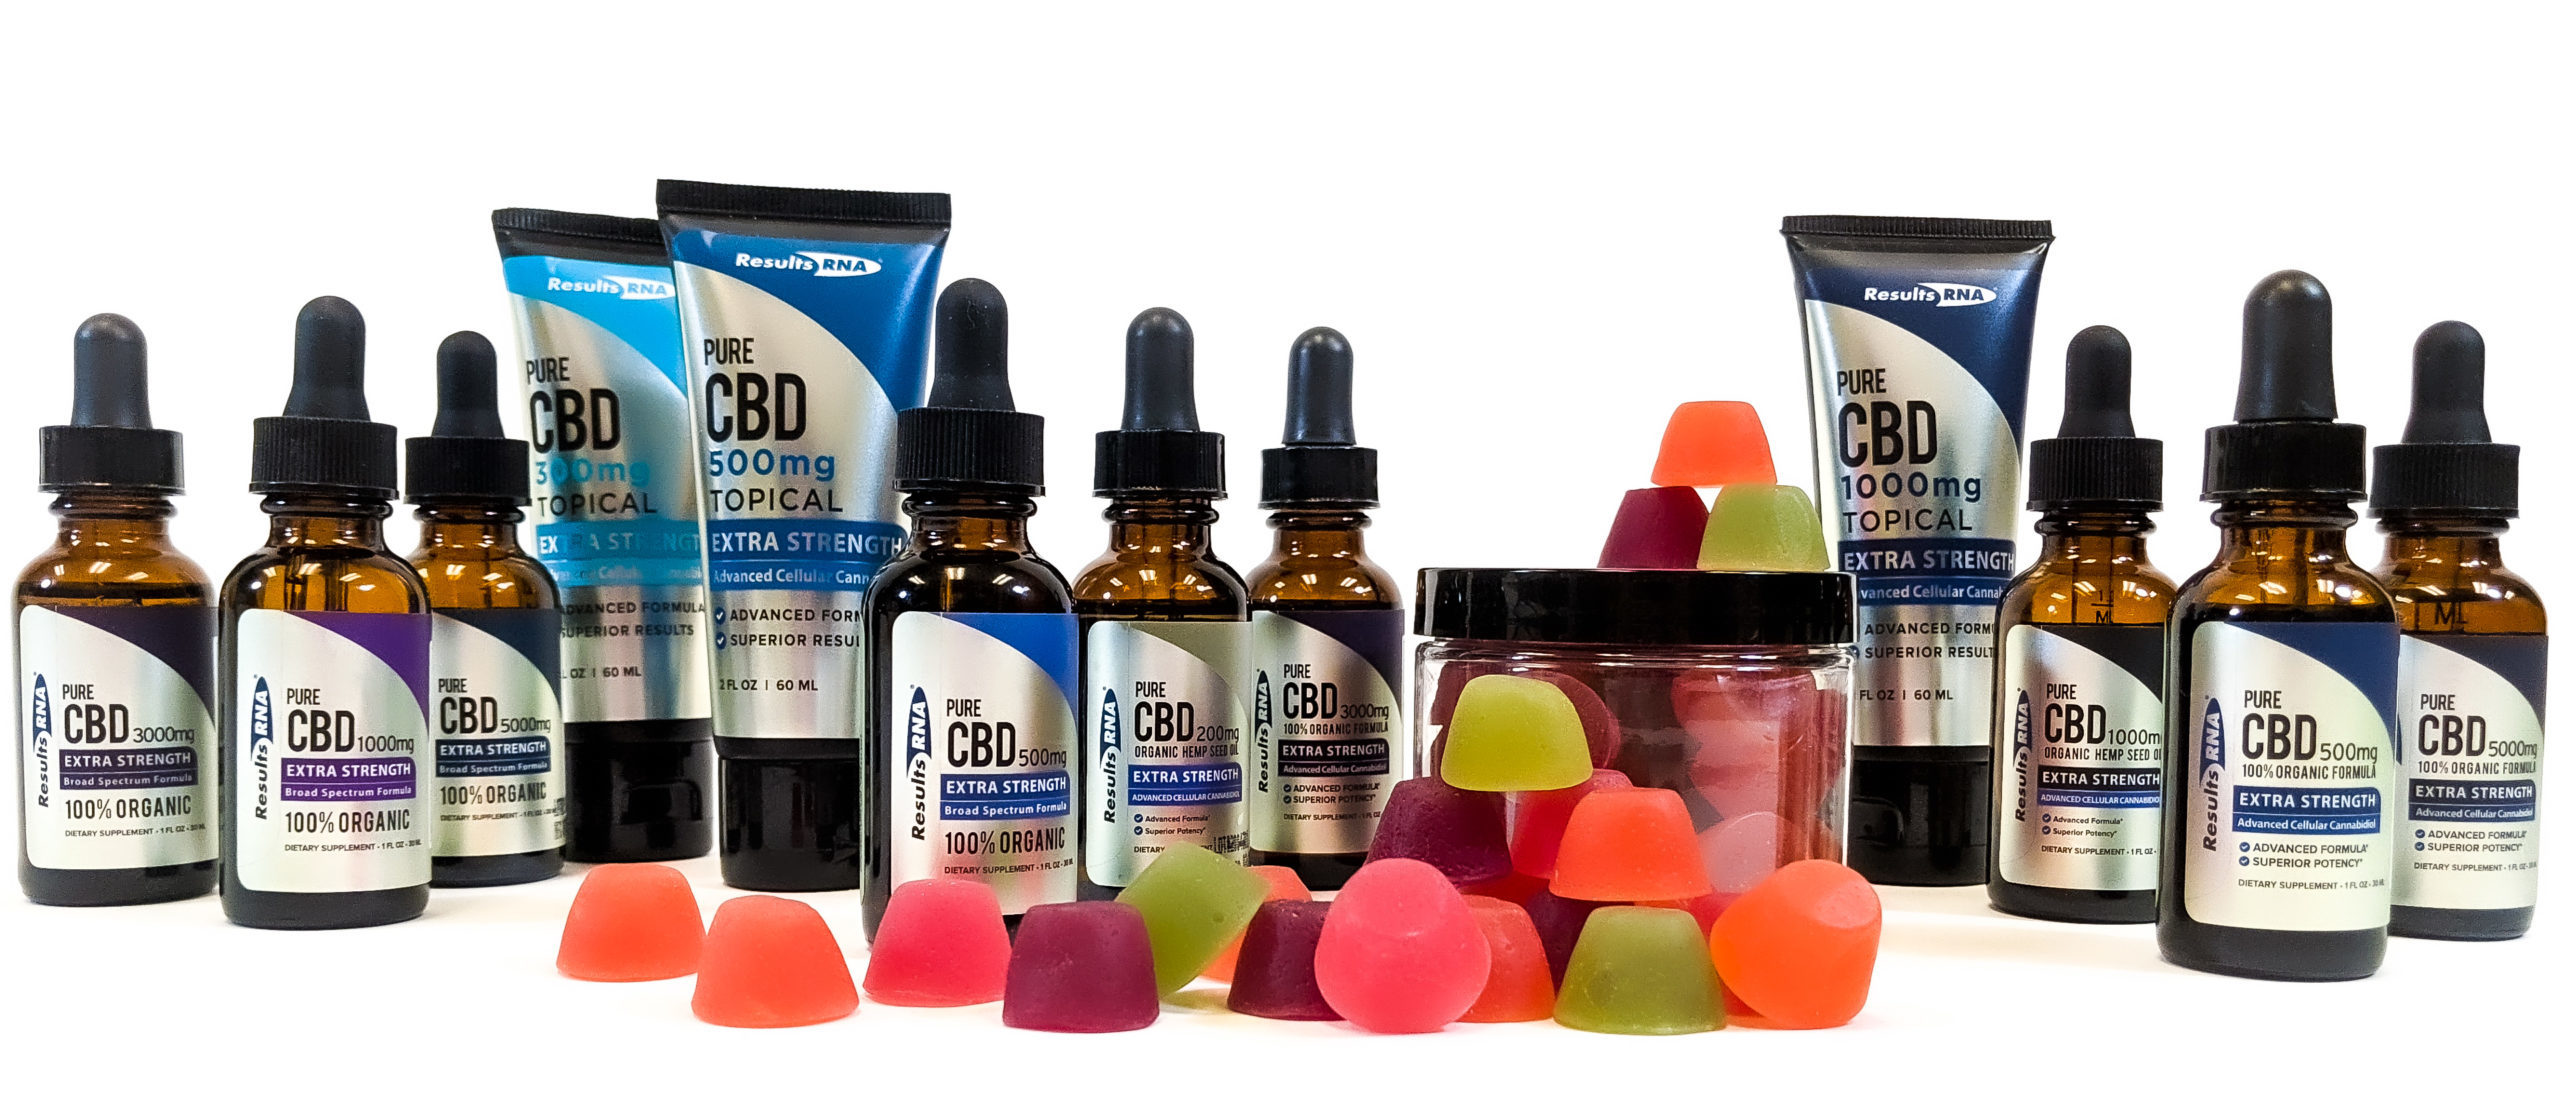 Results RNA Line of Pure CBD Oils, Gummies, and Topical Cream.